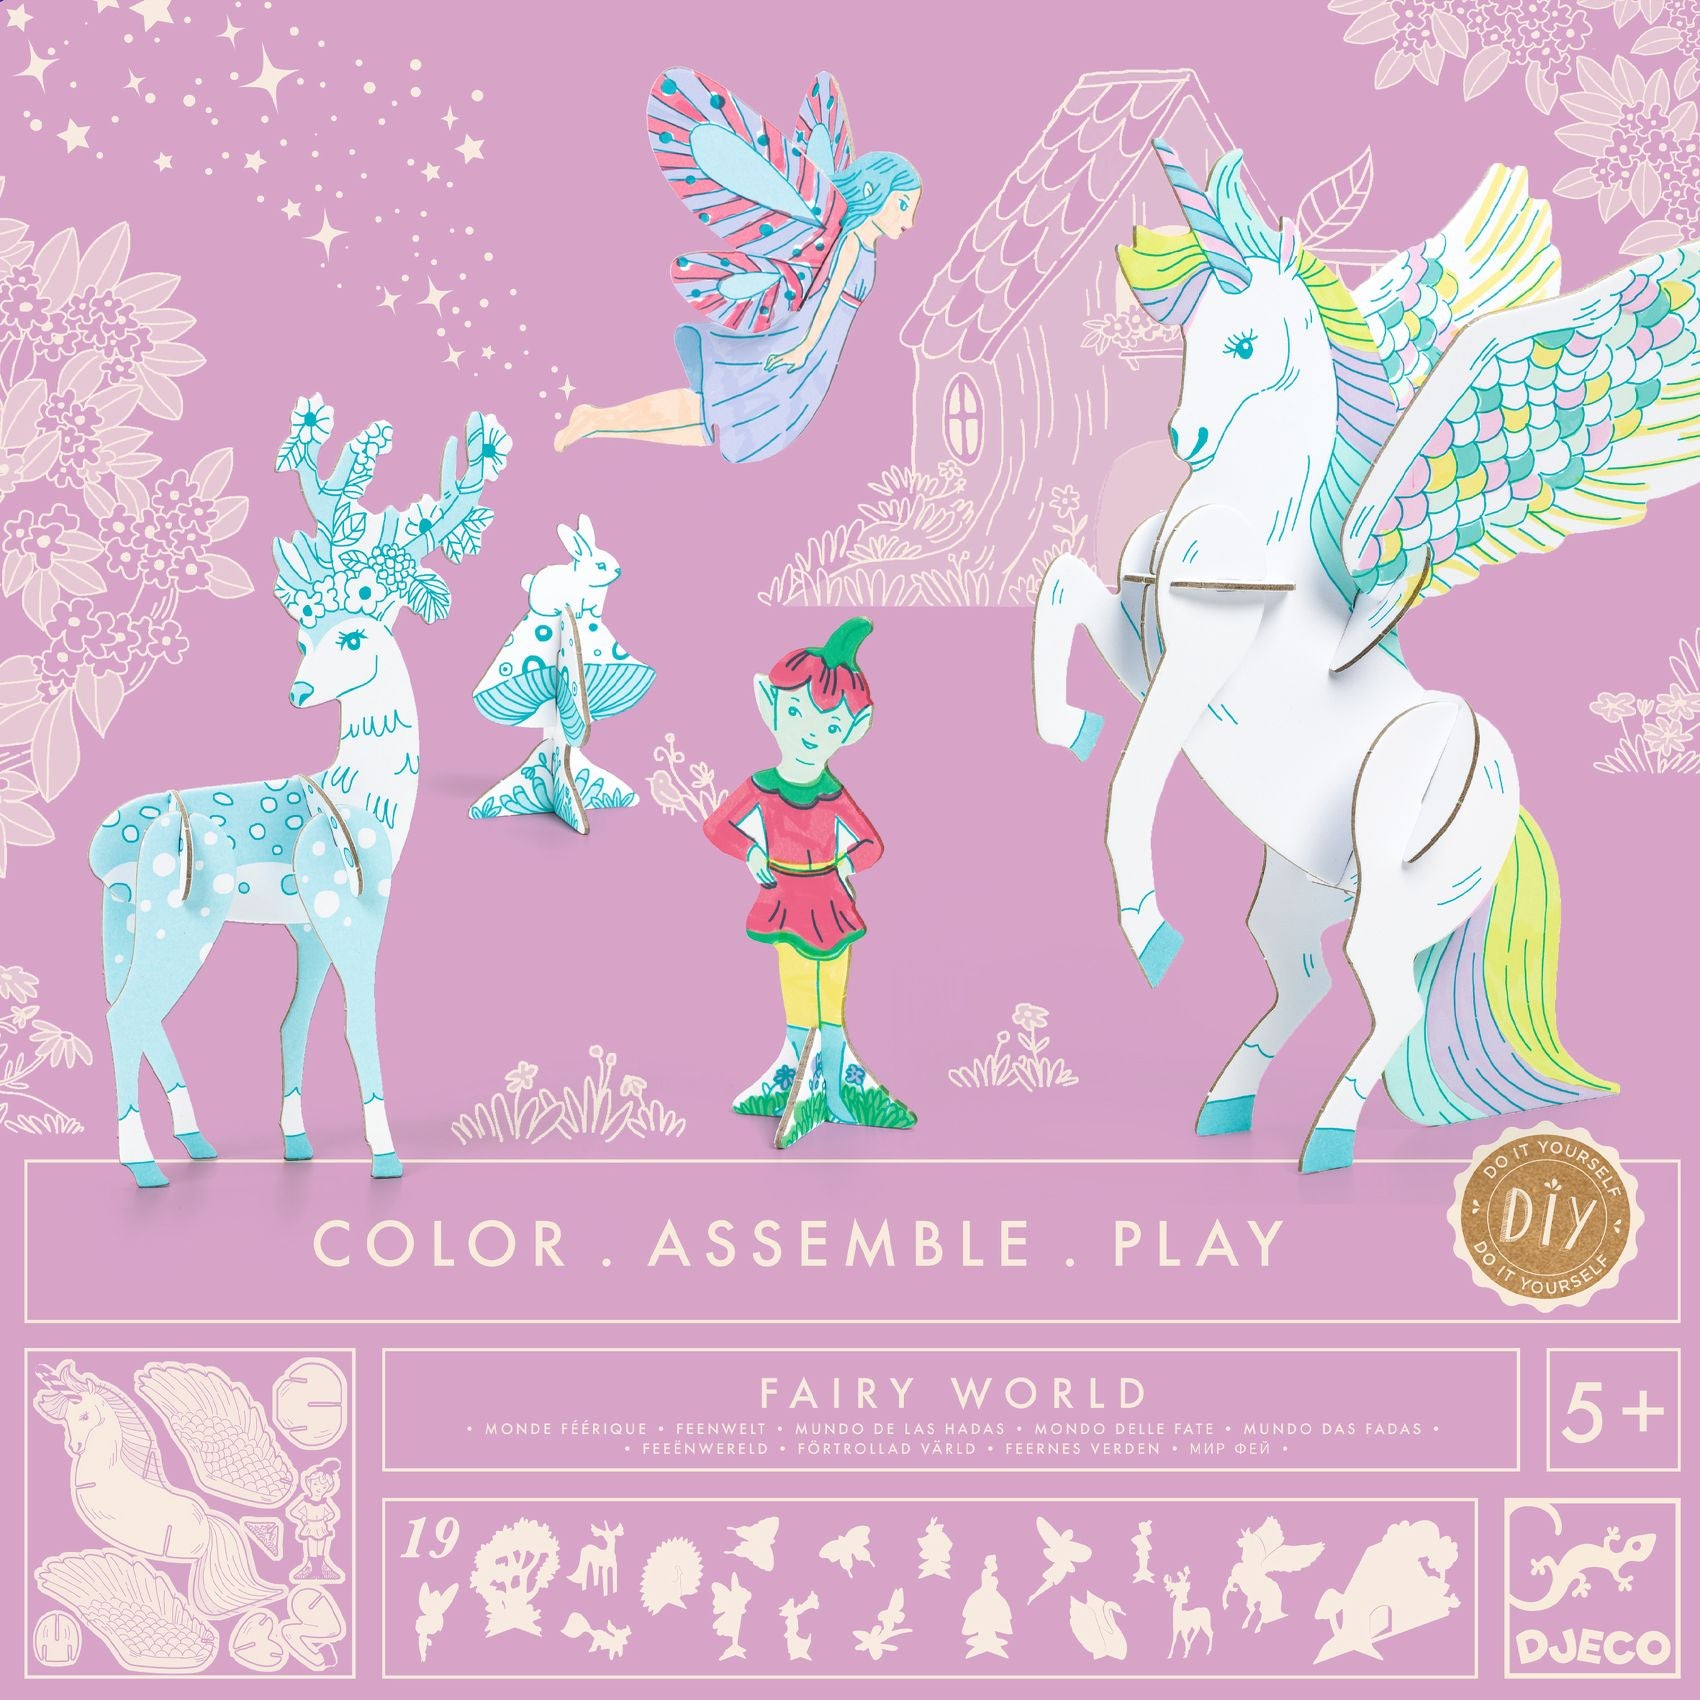 Color. Play. Assmemble. Fairy World